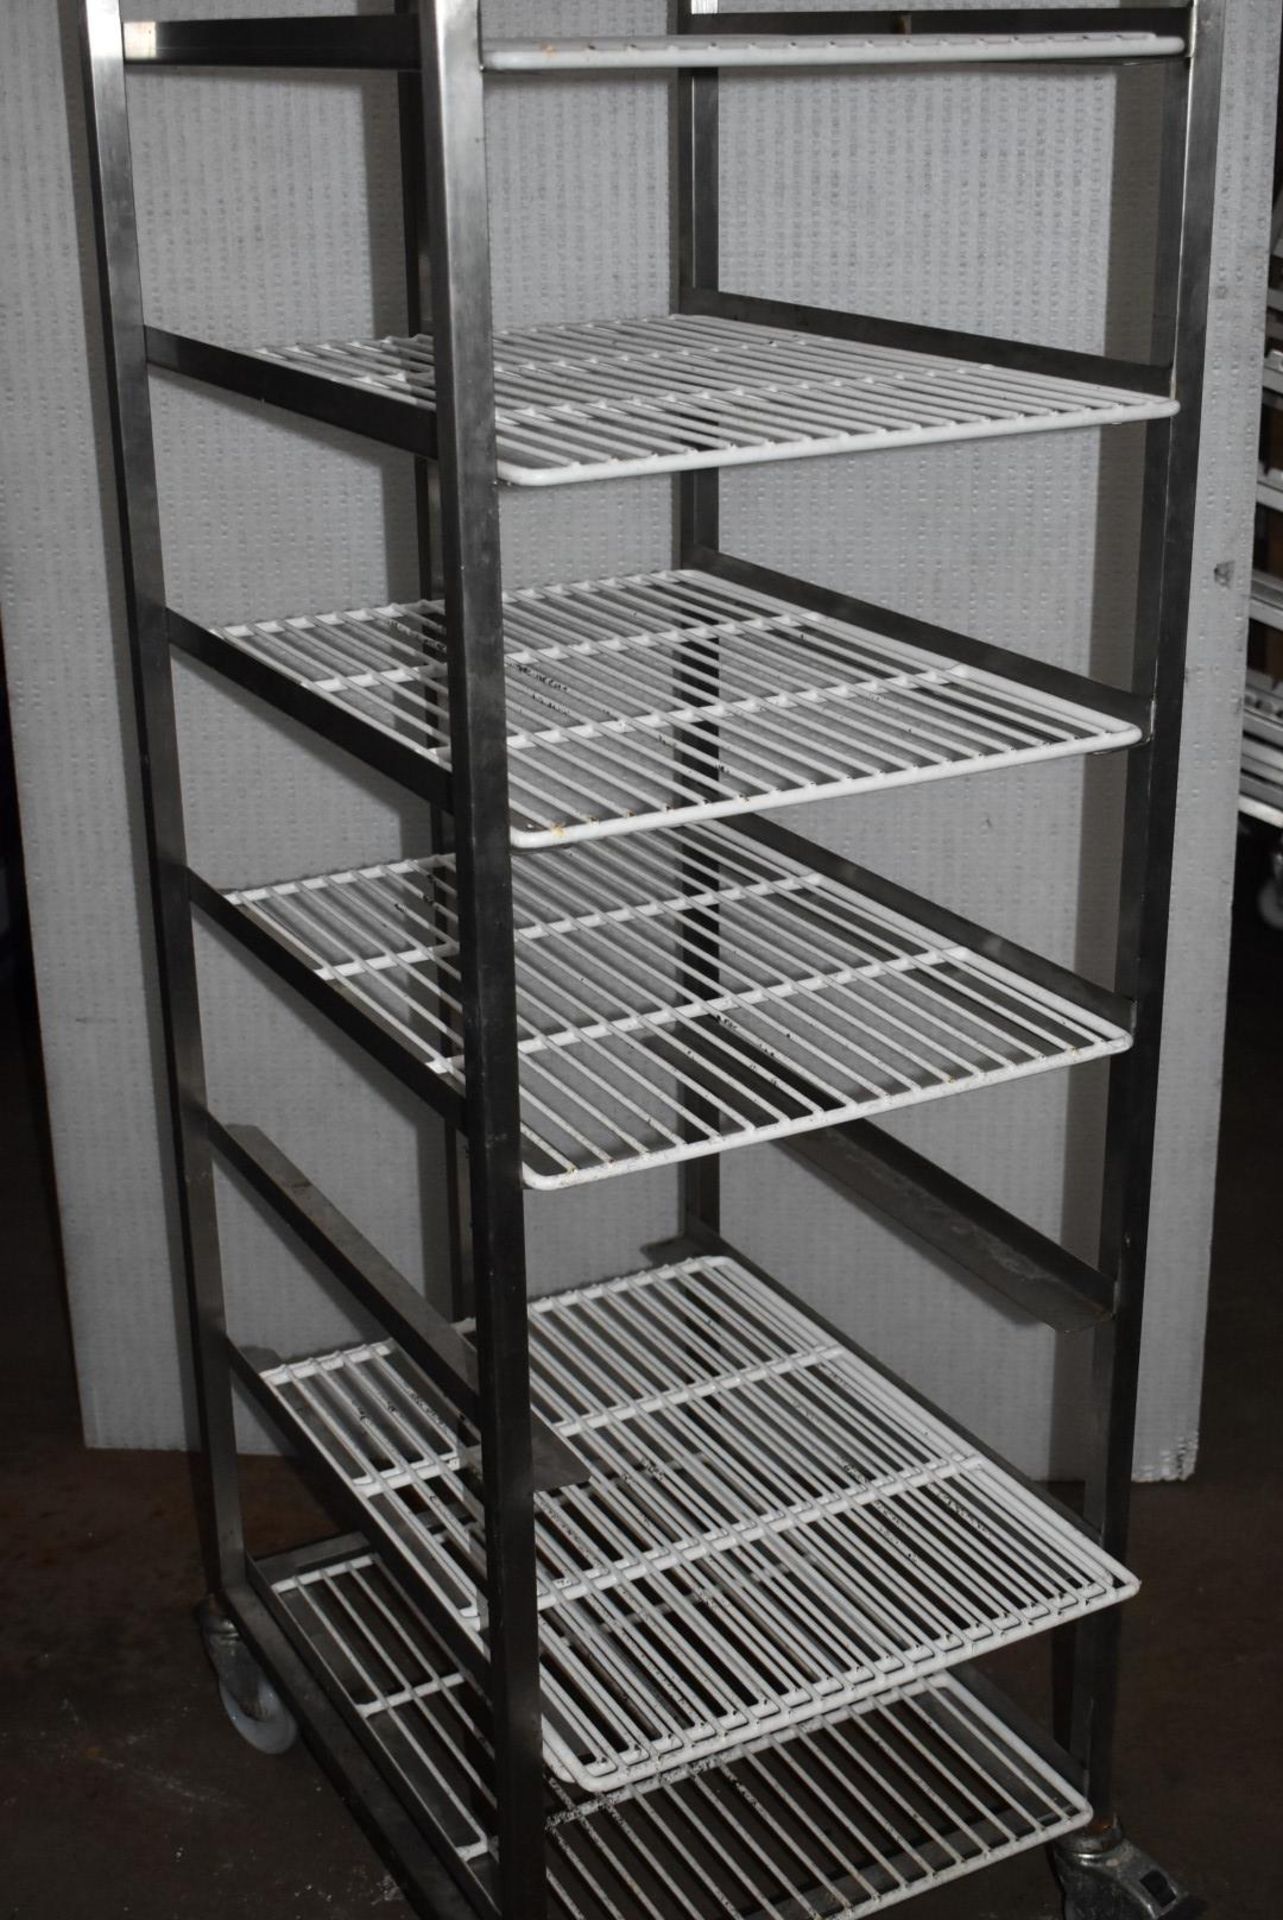 1 x Upright Stainless Steel Mobile Tray Rack With 8 Shelves - Shelf Size: 47 x 63 cms - CL675 - Ref: - Image 3 of 5